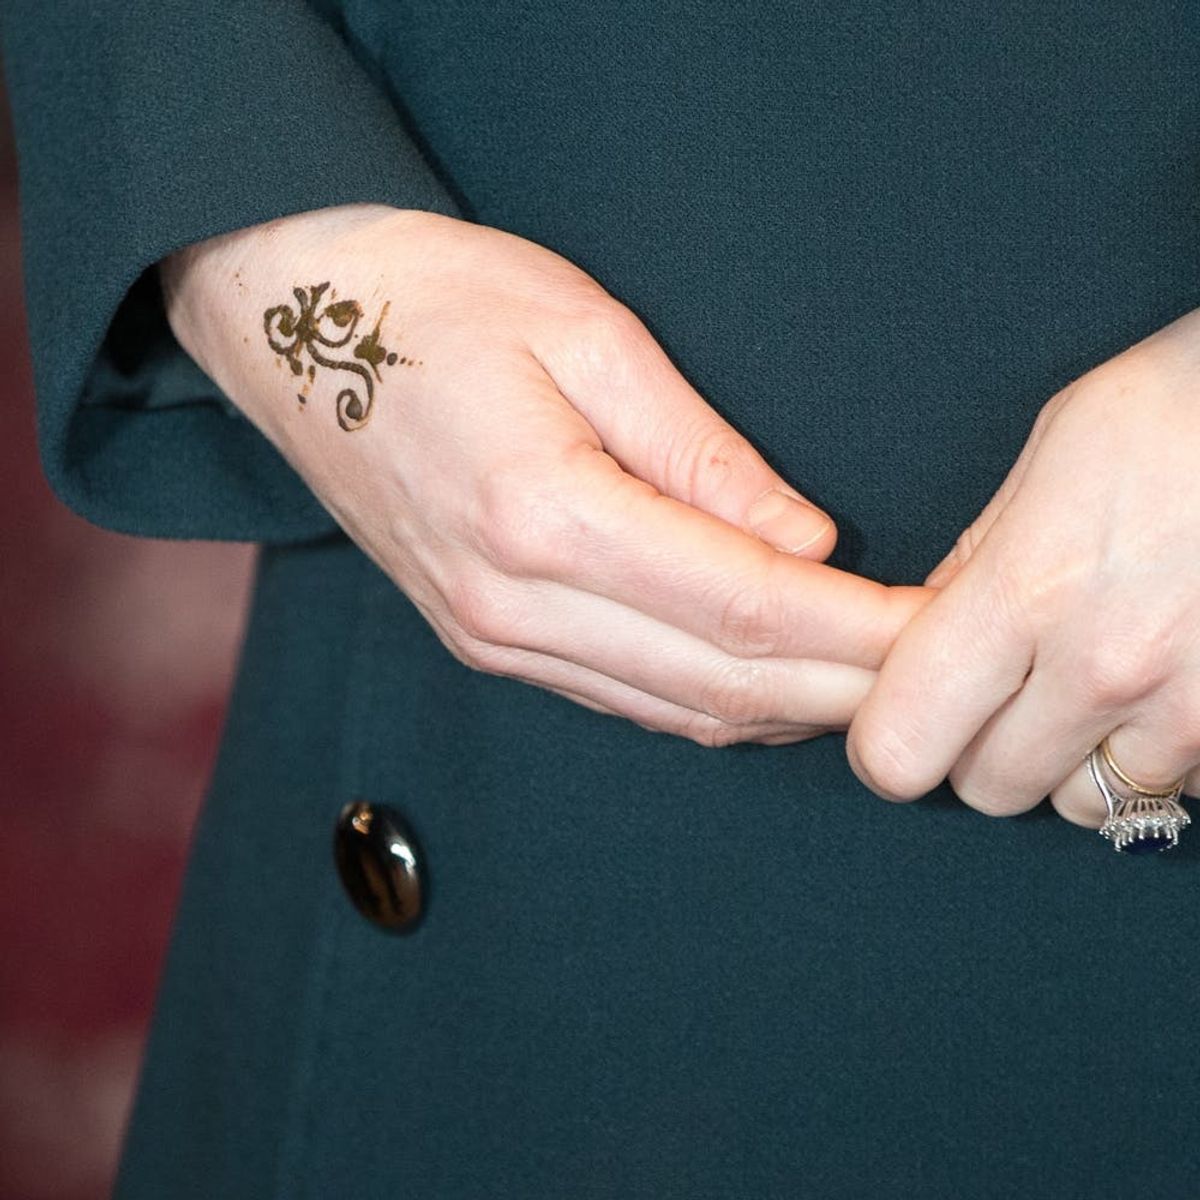 Kate Middleton Has a New Tattoo… Sort Of